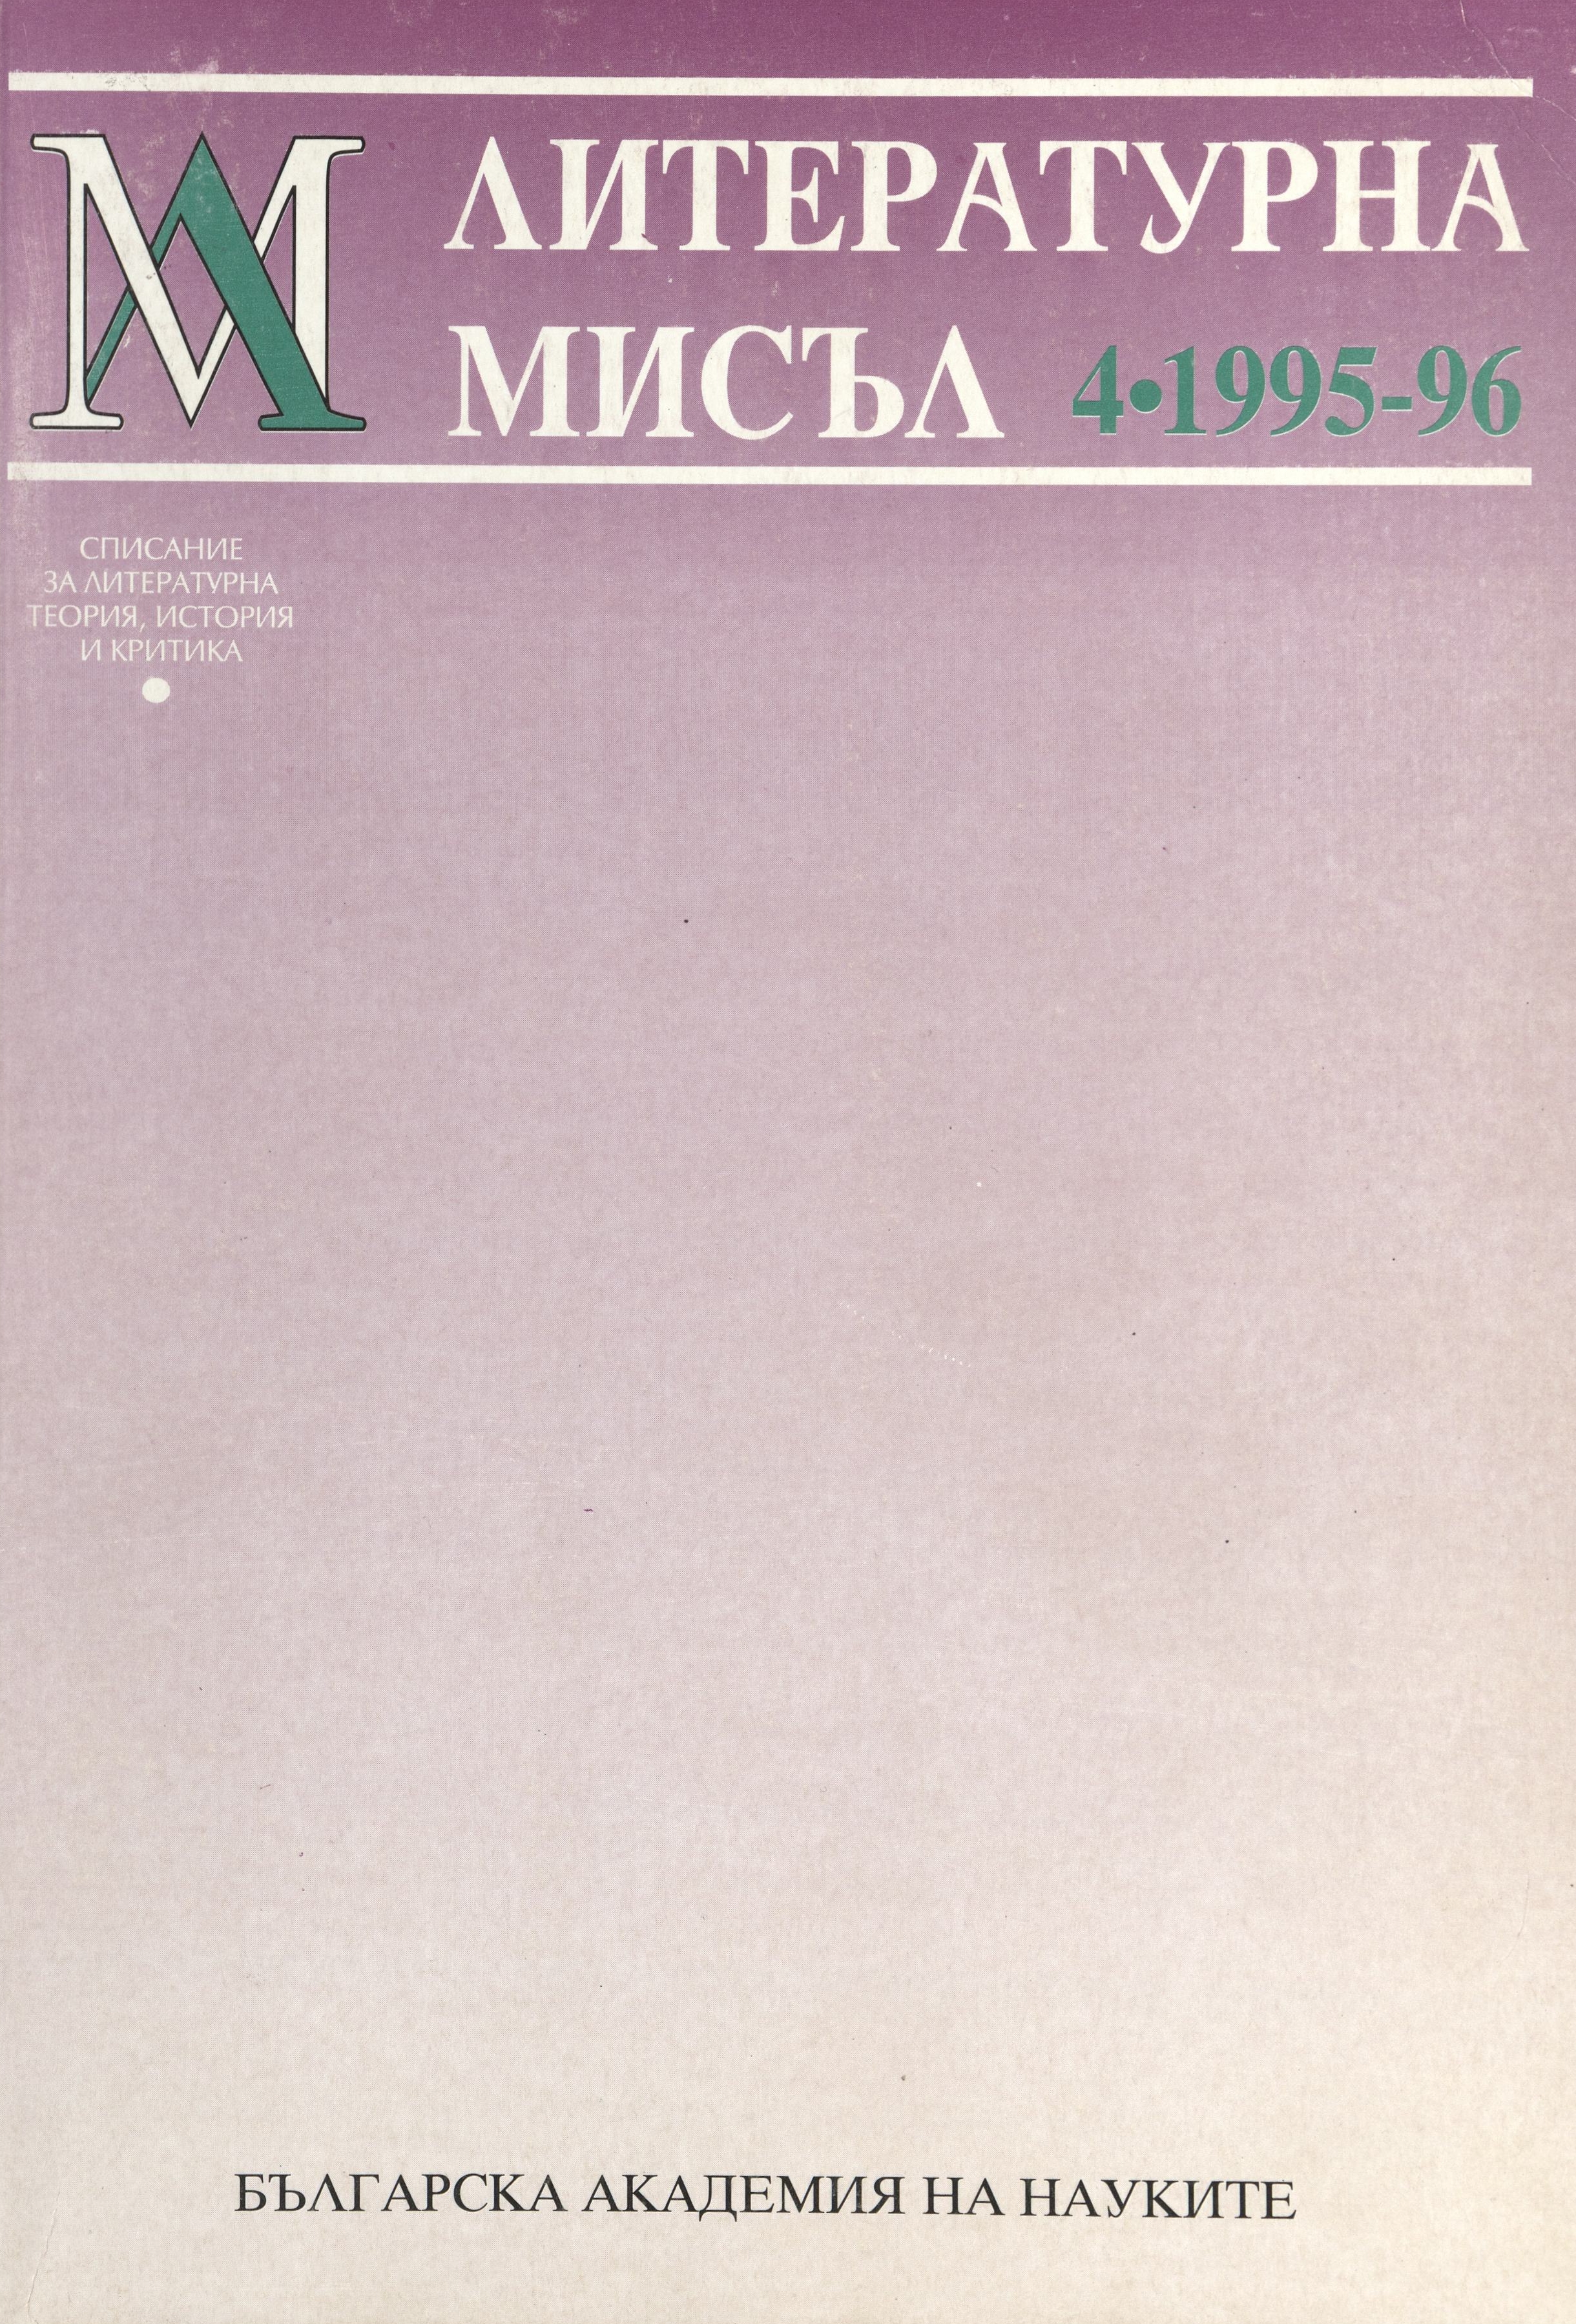 Issue 4, 1995-1996